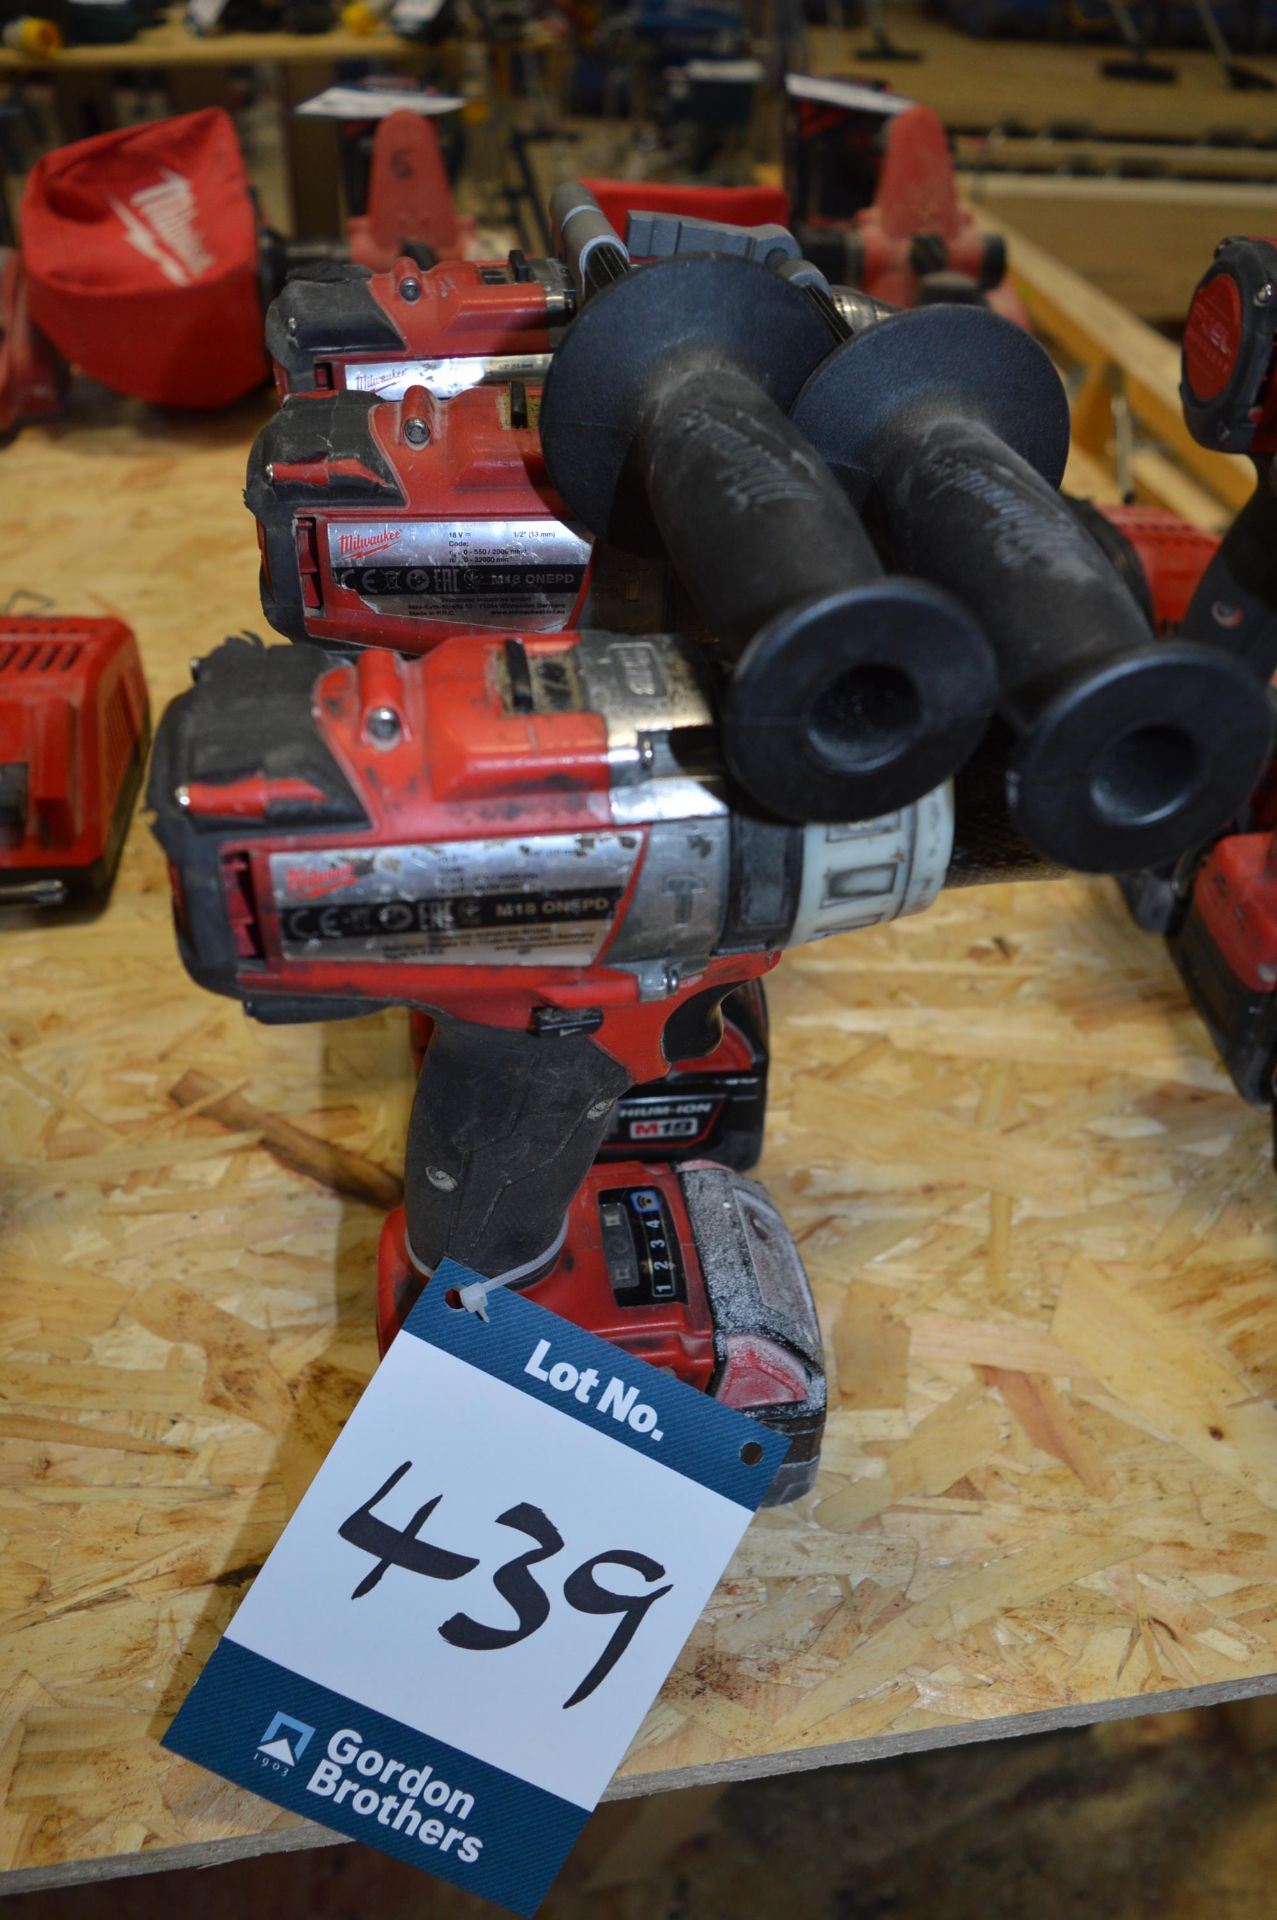 3x (no.) various Milwaukee, 18v drills each with battery and one charger